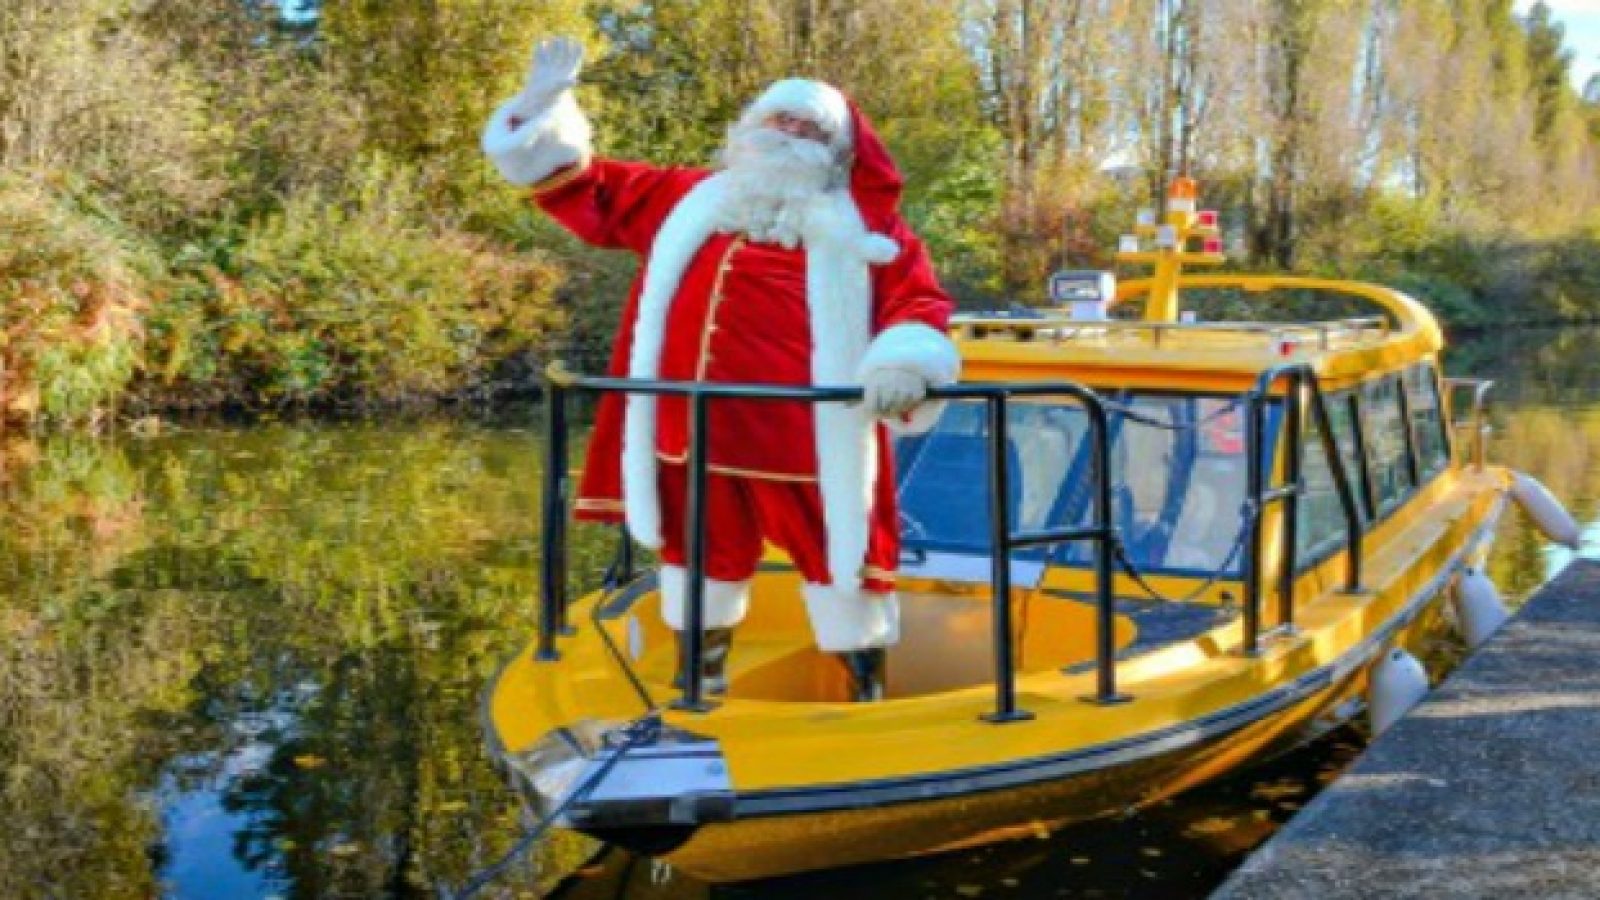 Santa cruises into intu Trafford Centre on Manchester’s first ‘waxi’